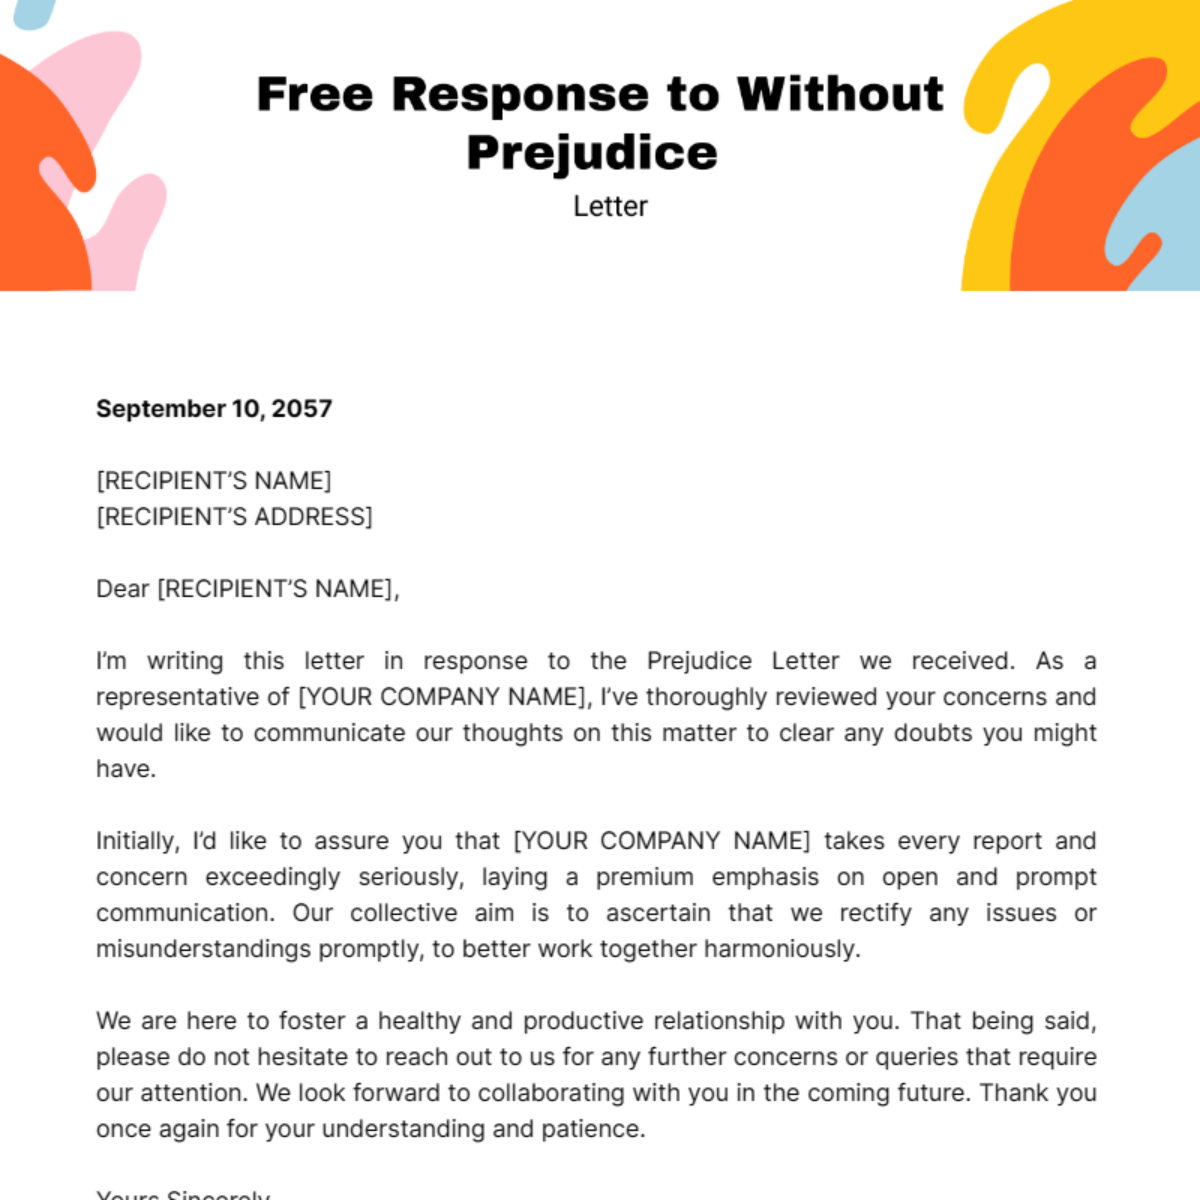 Free Response to Without Prejudice Letter